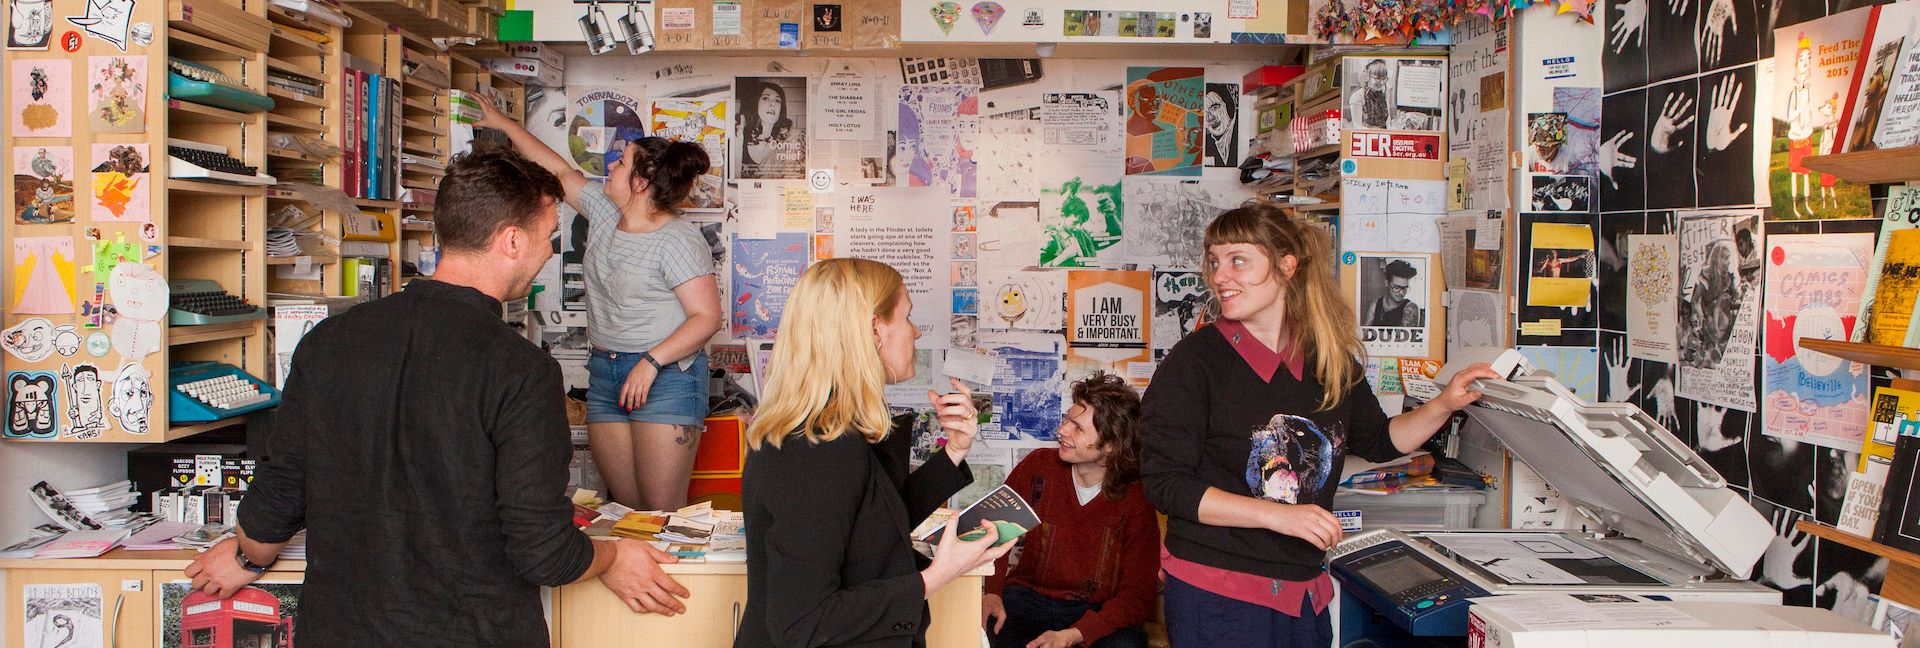 A photograph of Sticky Institute volunteers and workers chatting and working inside Sticky.